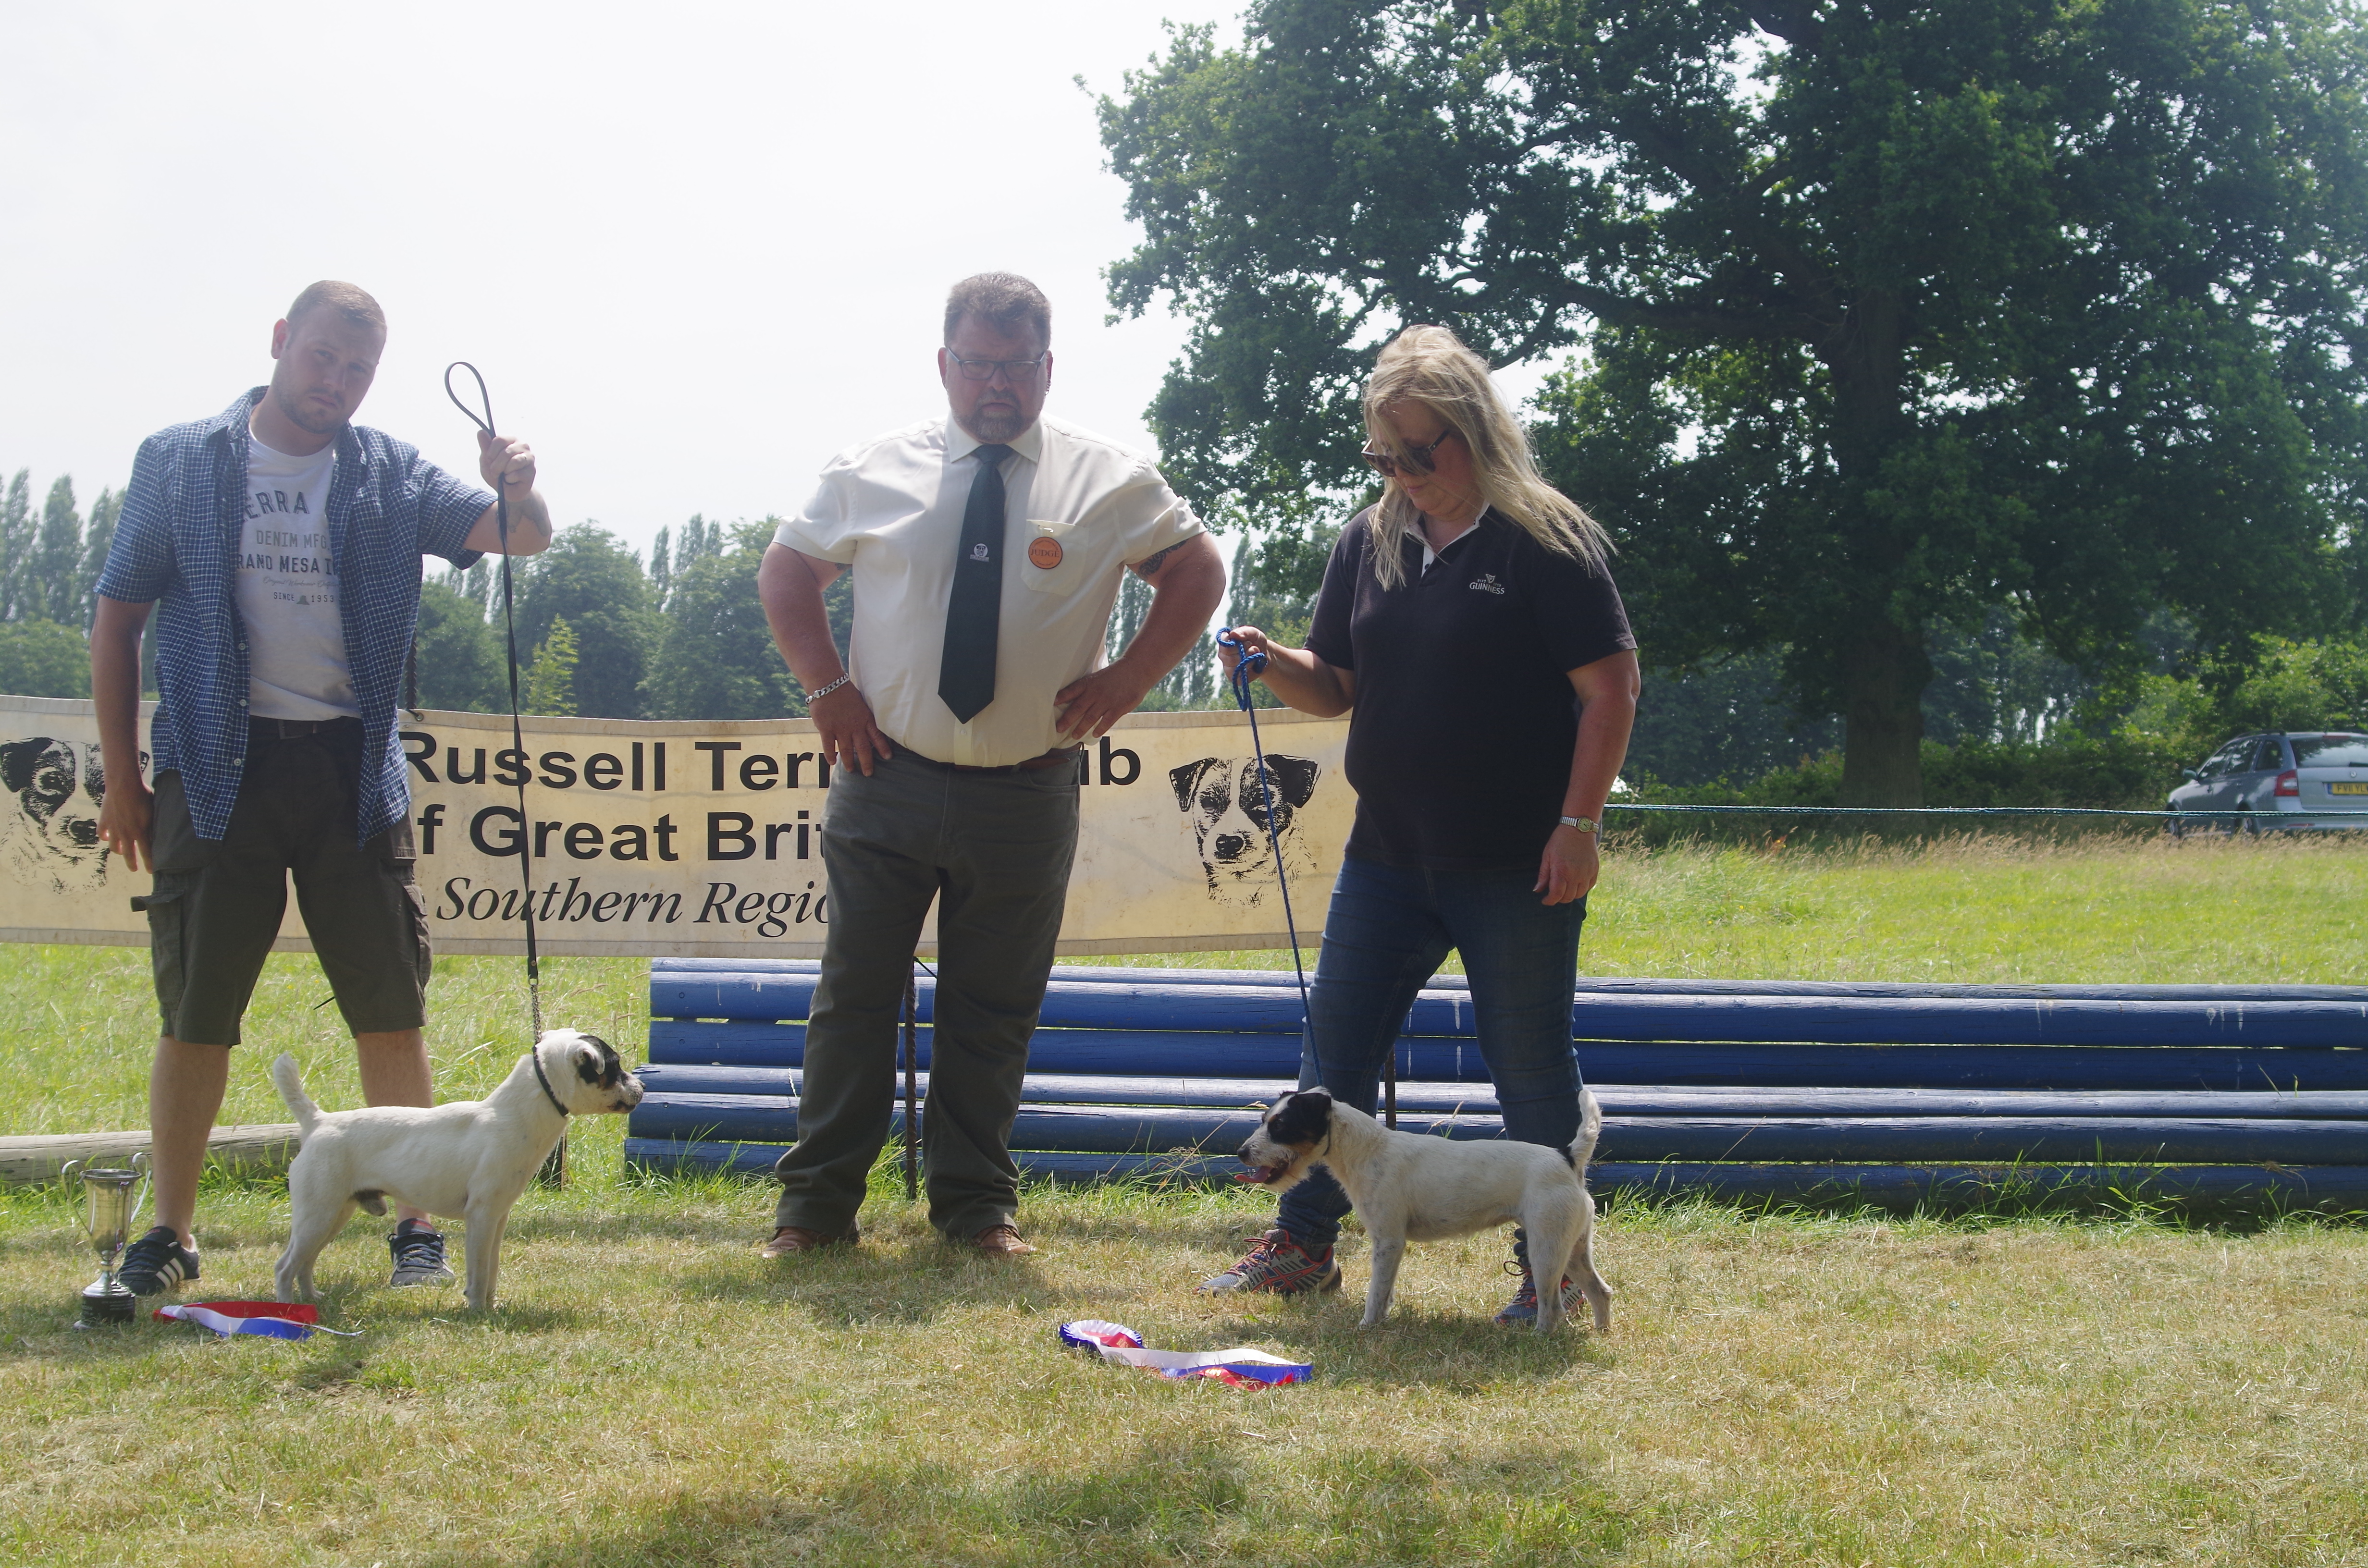 Best Under 12.5 inch Craig Hickman with Friarmoor Ronnie of Huntswood. Reserve Francesca Burrows with Pixie.